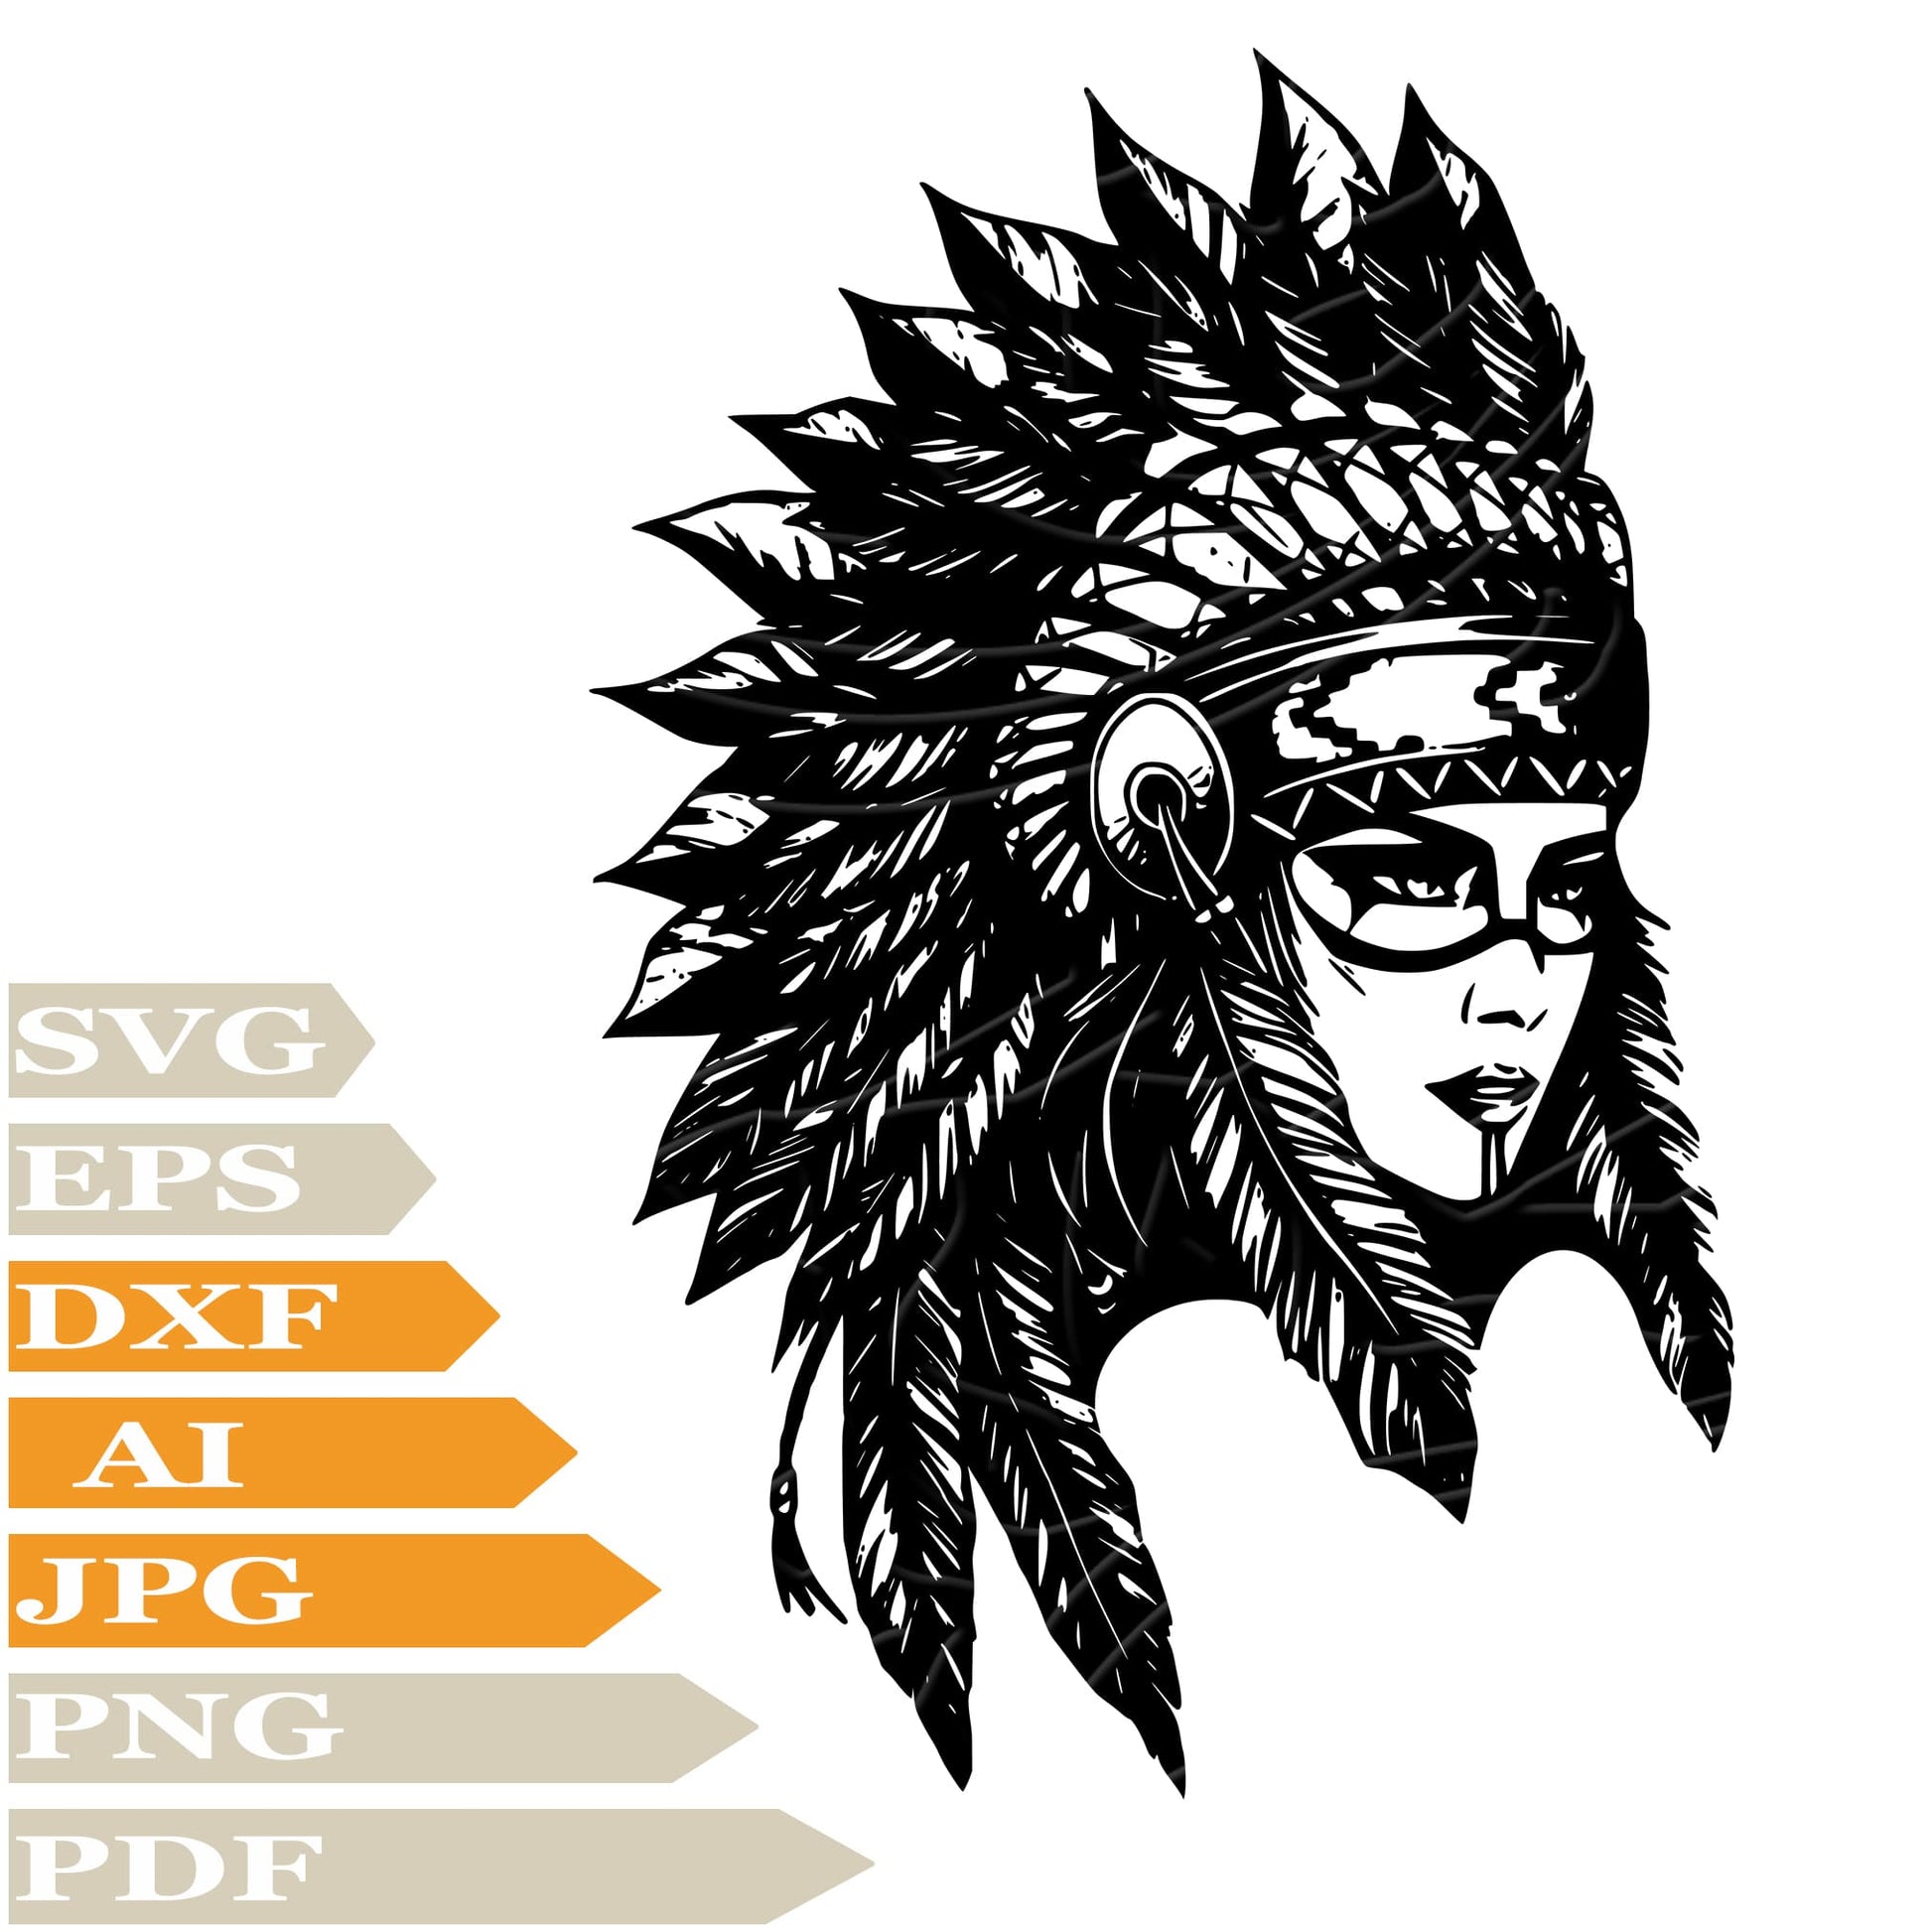 Native American ﻿SVG, Native American Girl SVG Design, Girl PNG, Native American Girl Vector Graphics, Native American Girl For Cricut, Digital Instant Download, Clip Art, Cut File, For Shirts, Silhouette